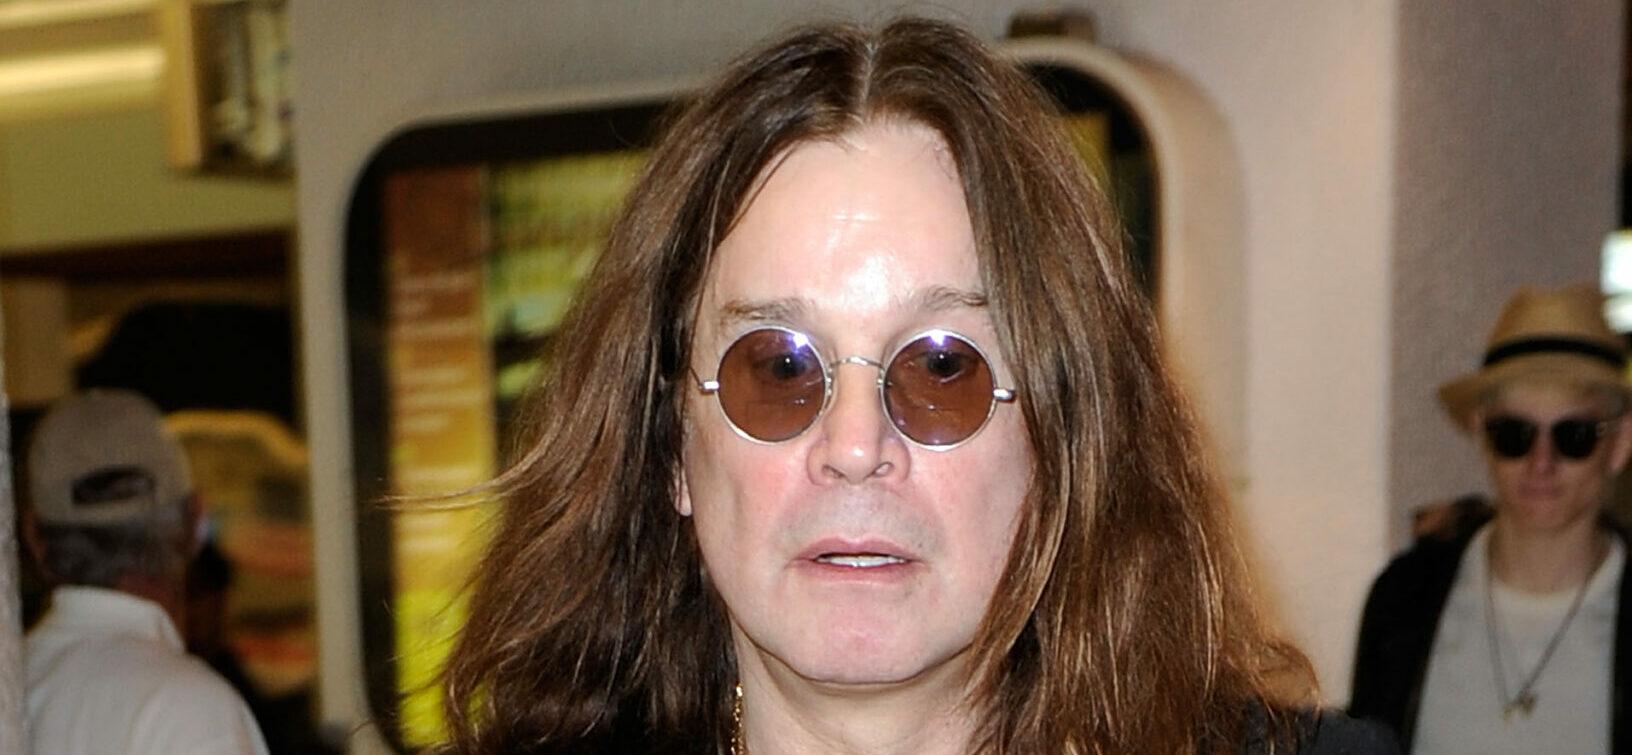 Ozzy Osbourne Expresses Desire To Return To Stage Amid Retirement